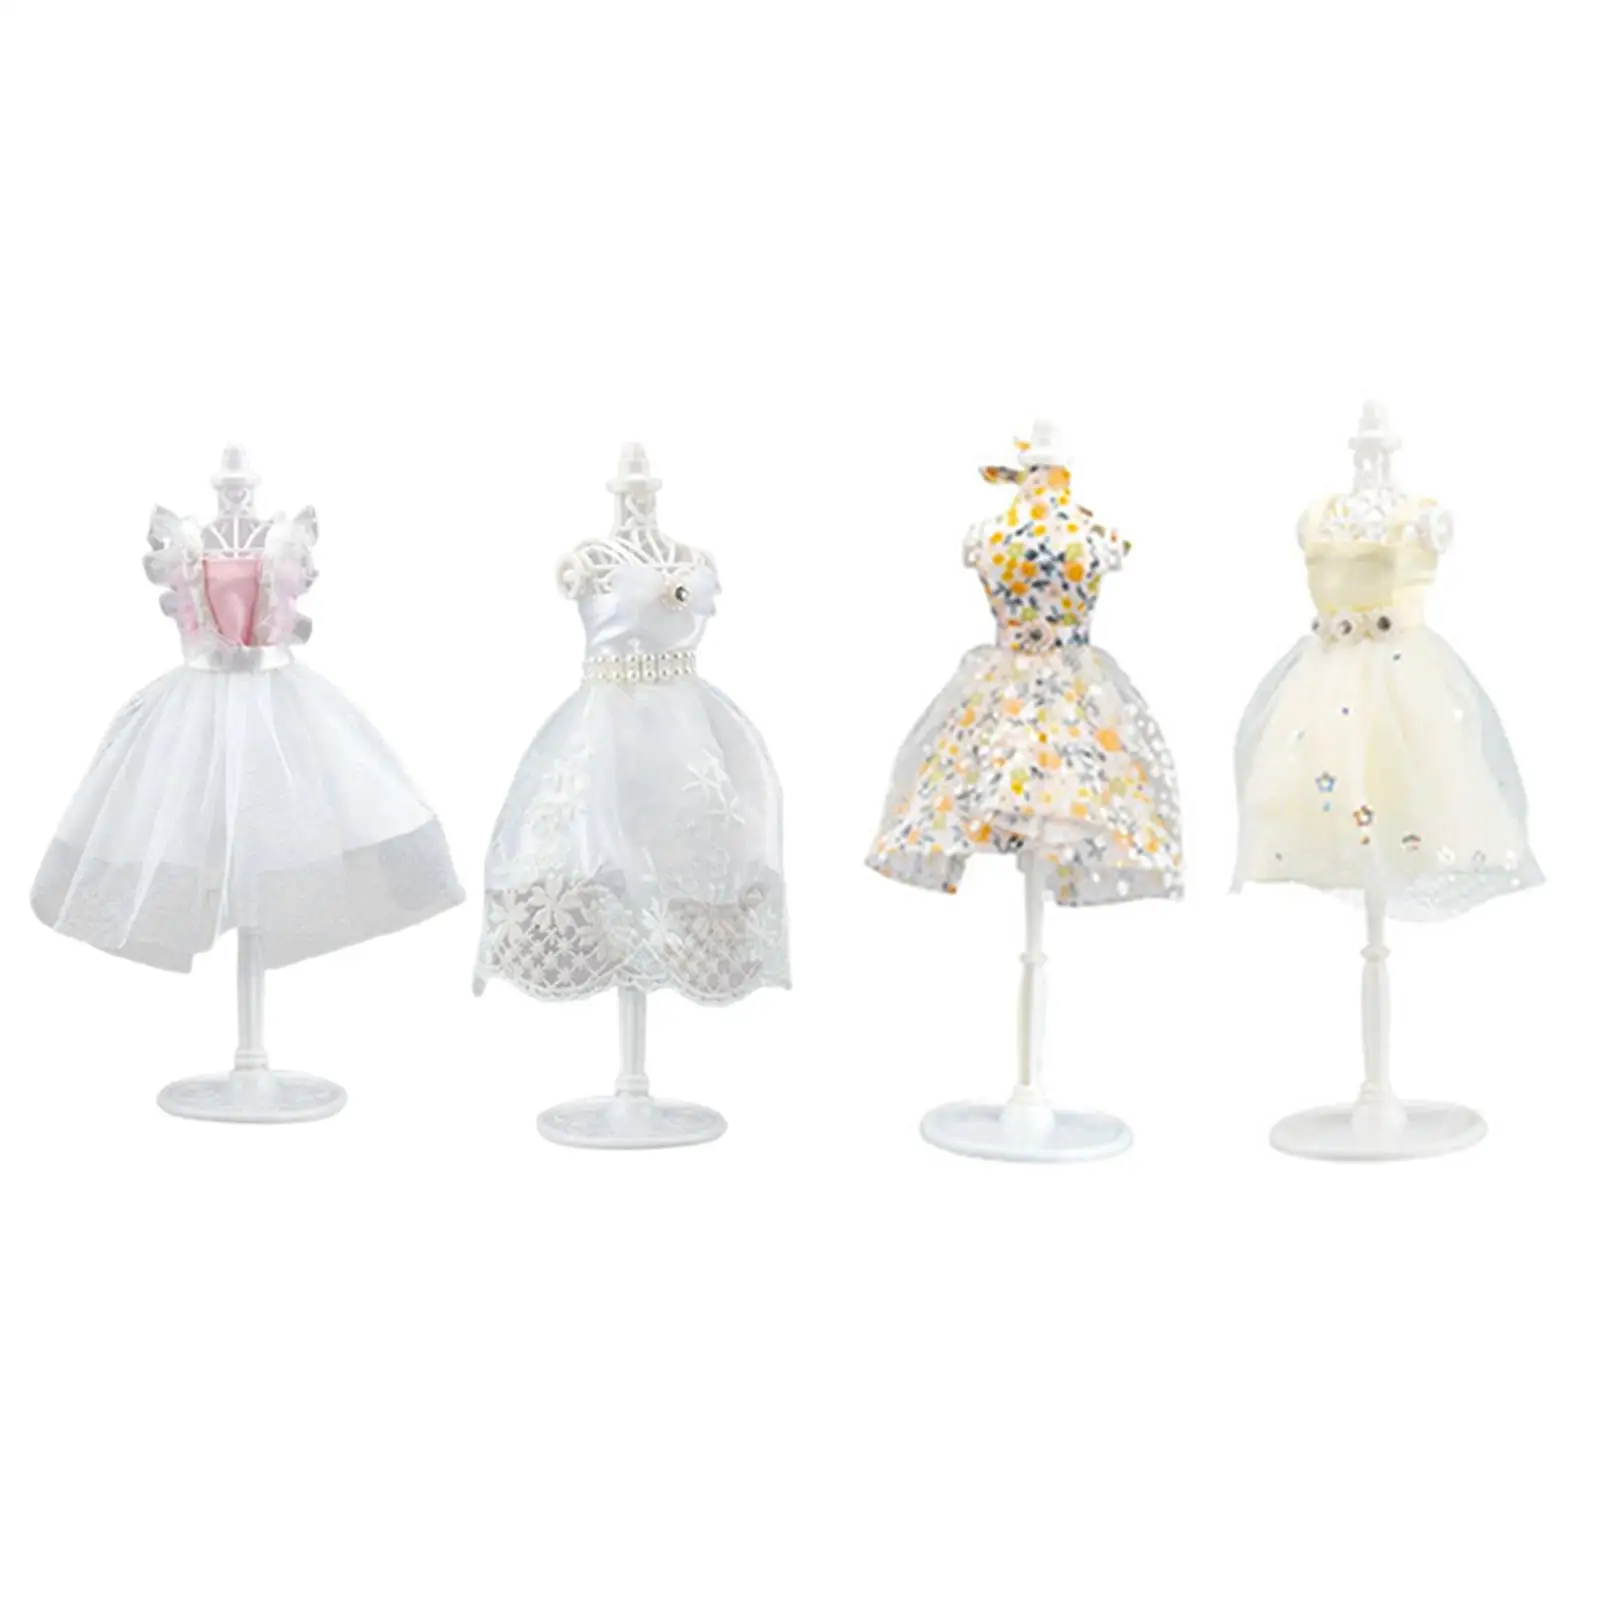 Doll Clothing design Learning Toys Princess Doll Clothes Making Princess Dress